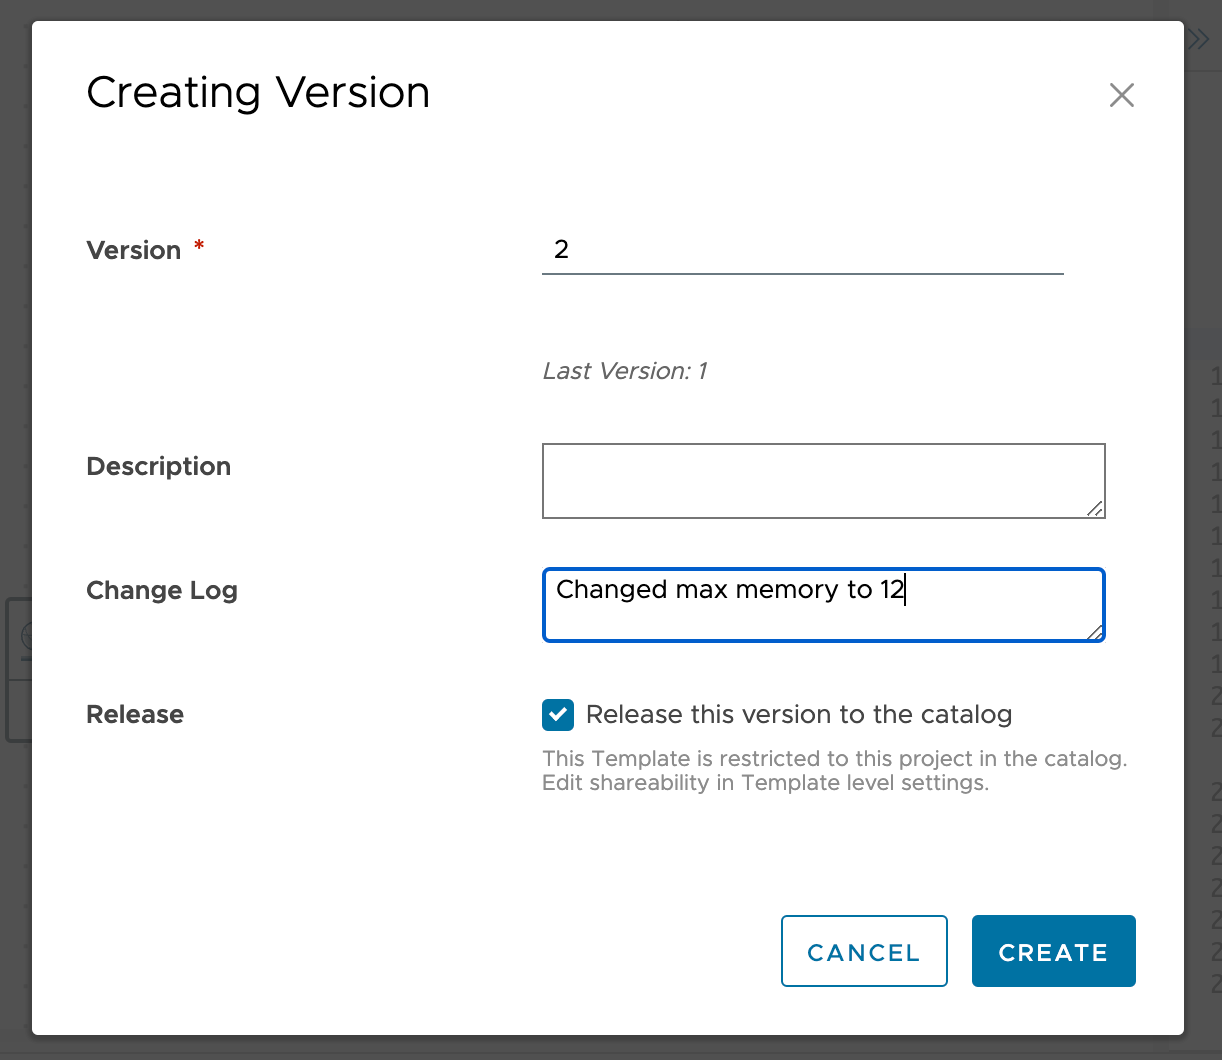 Create new version and release to catalog